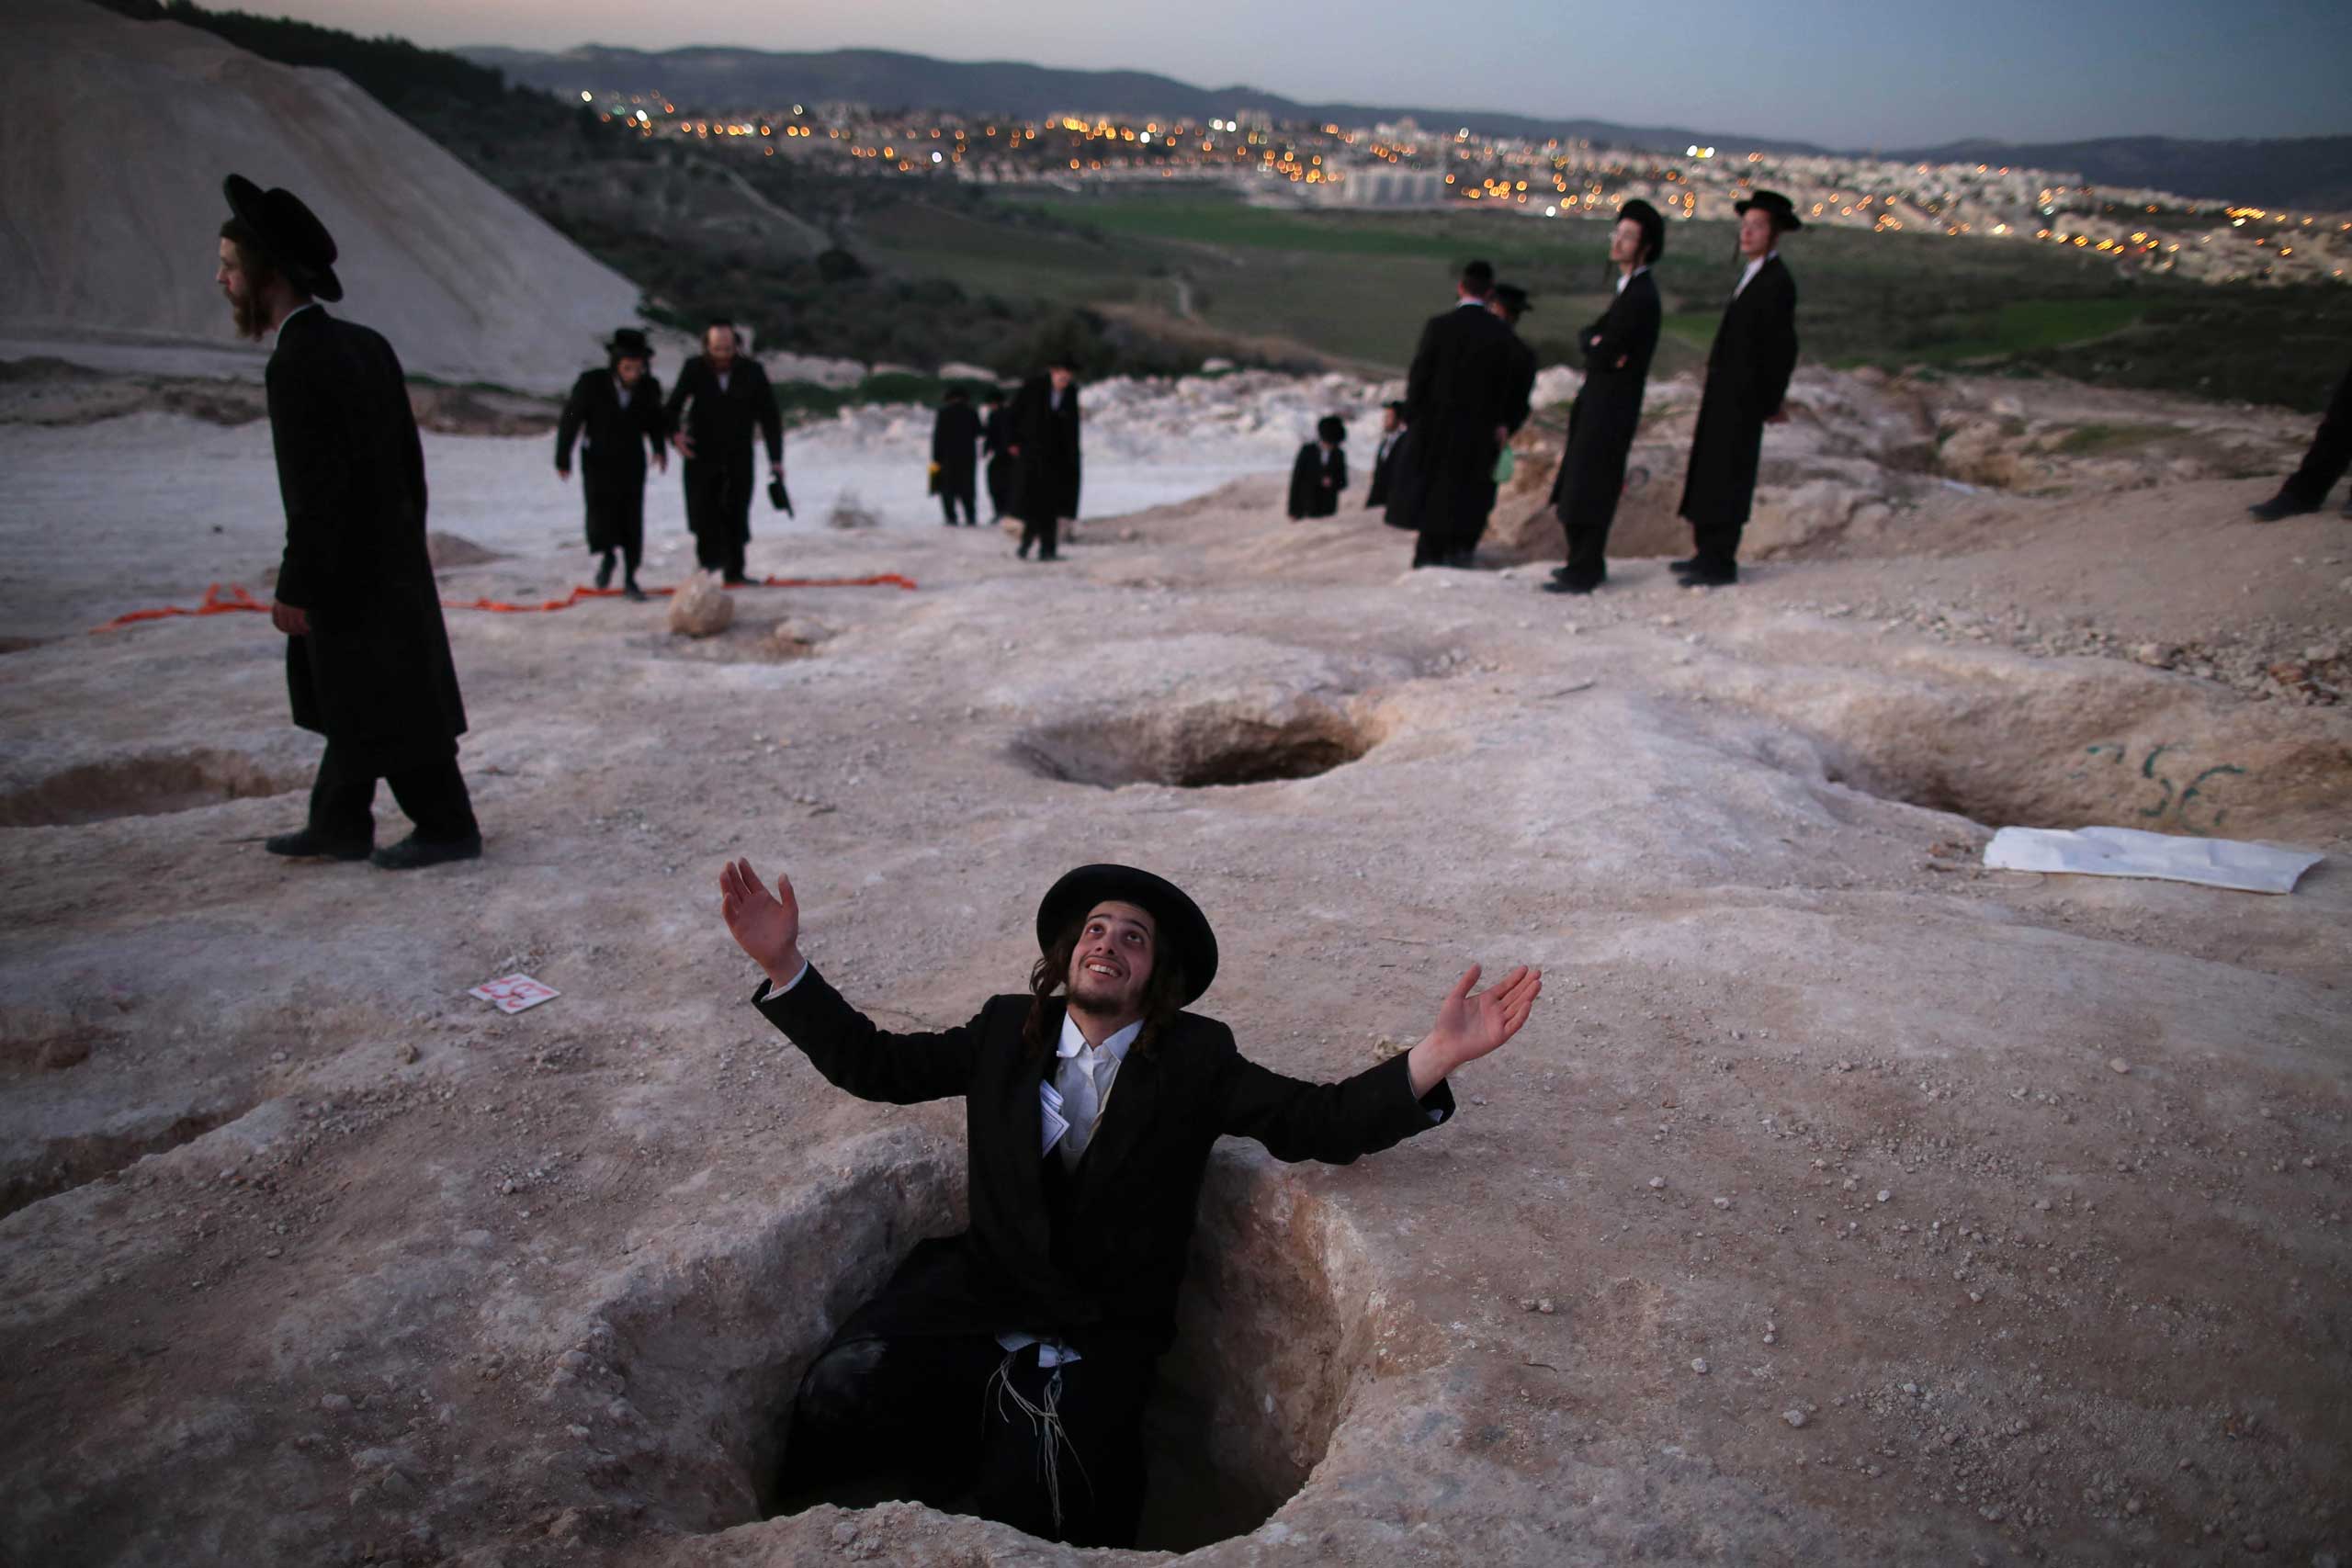 An Ultra-Orthodox Jewish man sits in a hole and prays during a demonstration in Beit Shemesh, Israel, protesting against the construction of new housing units that he believes would be built at the site of ancient Jewish graves, Feb. 12, 2014.